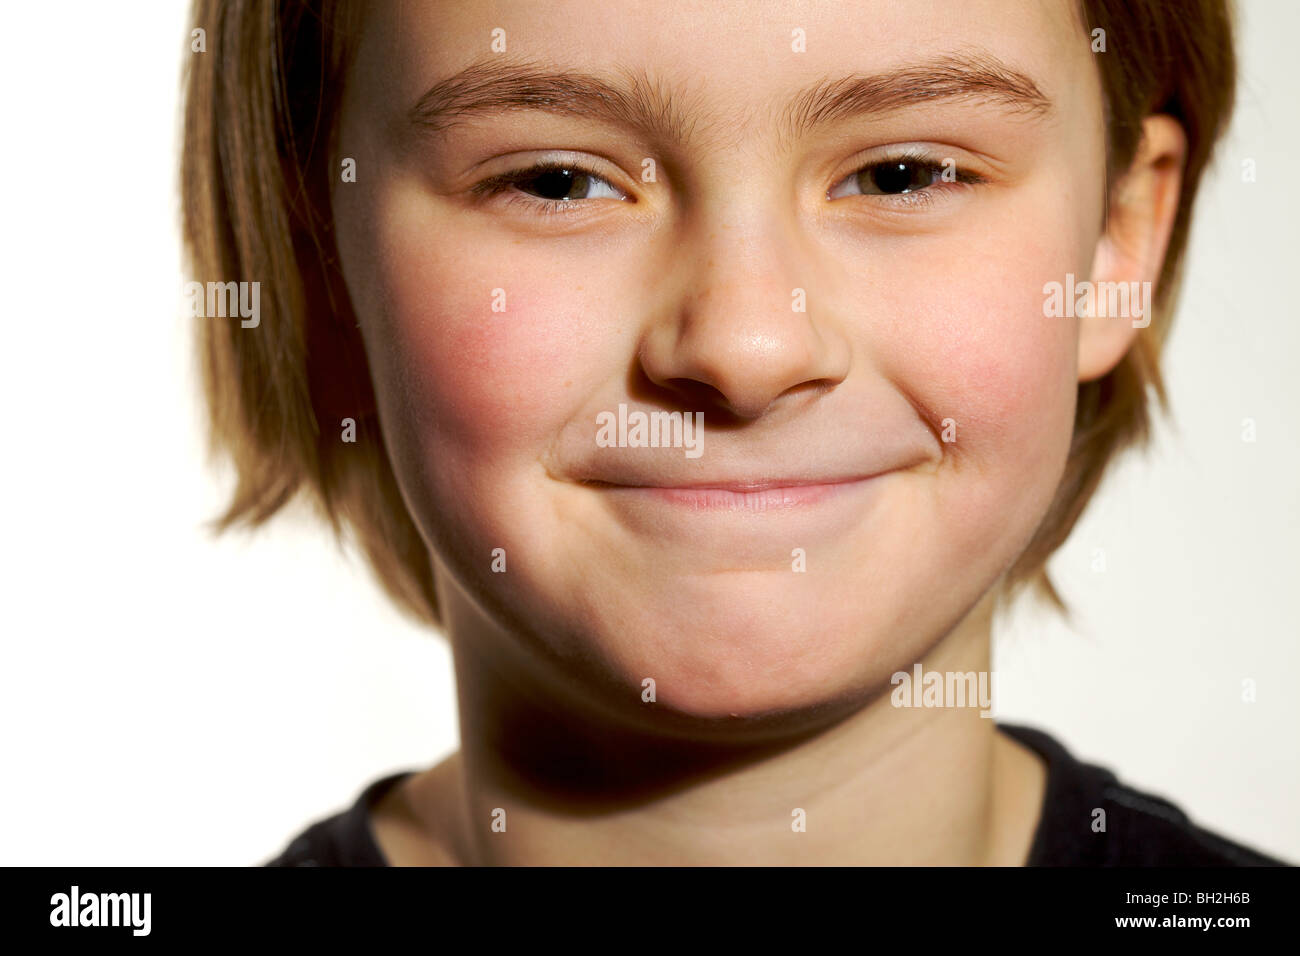 Young girl smiling angry sad expression facepull emotion bored grunge Stock Photo